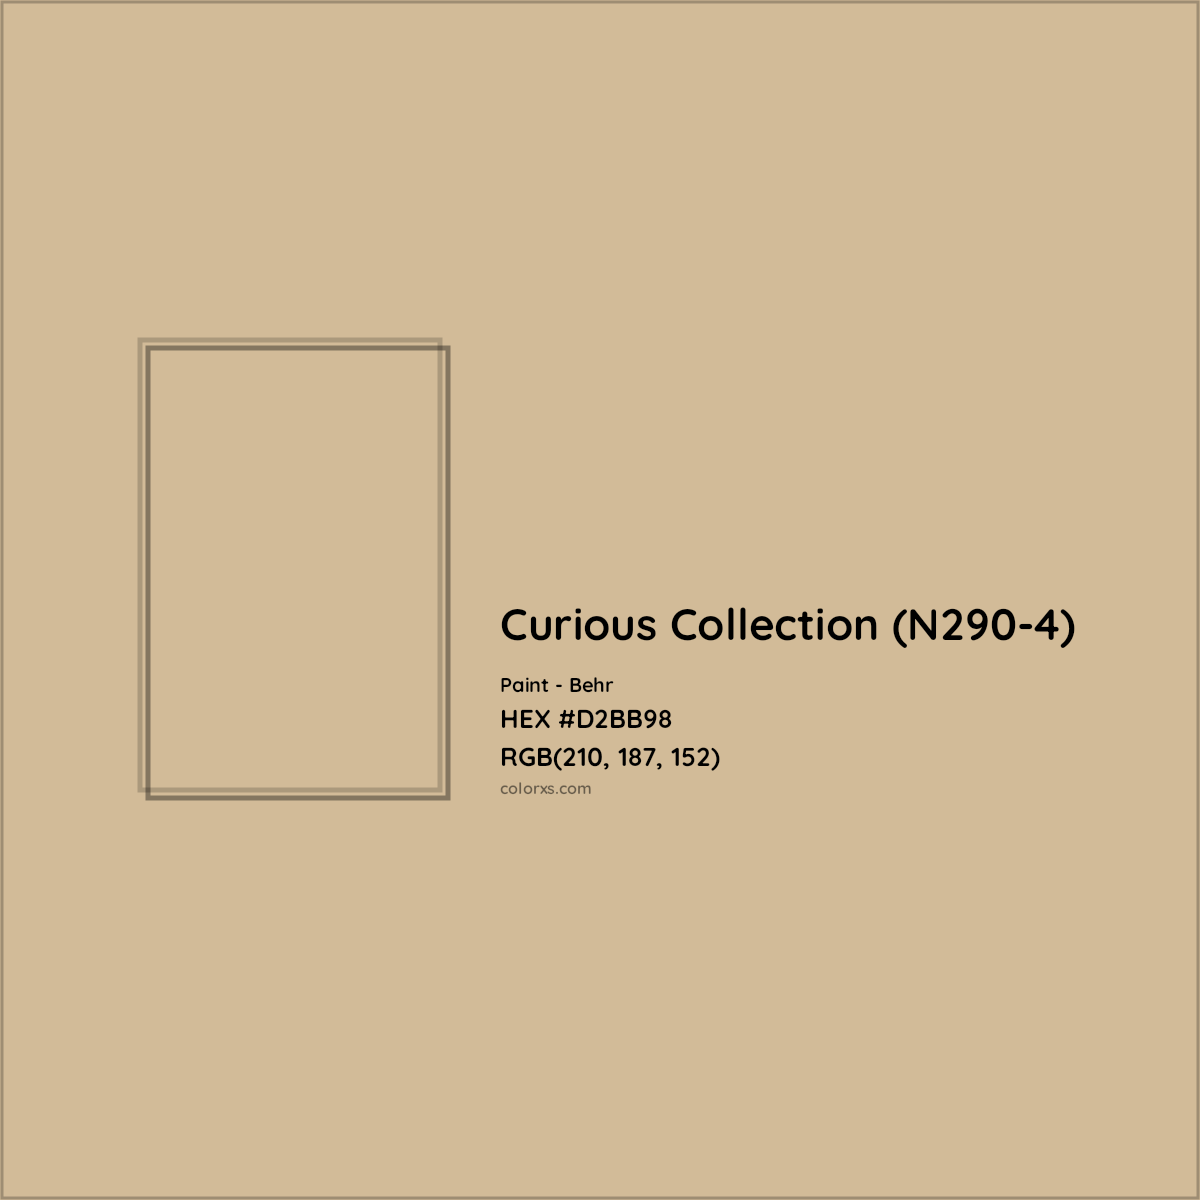 HEX #D2BB98 Curious Collection (N290-4) Paint Behr - Color Code